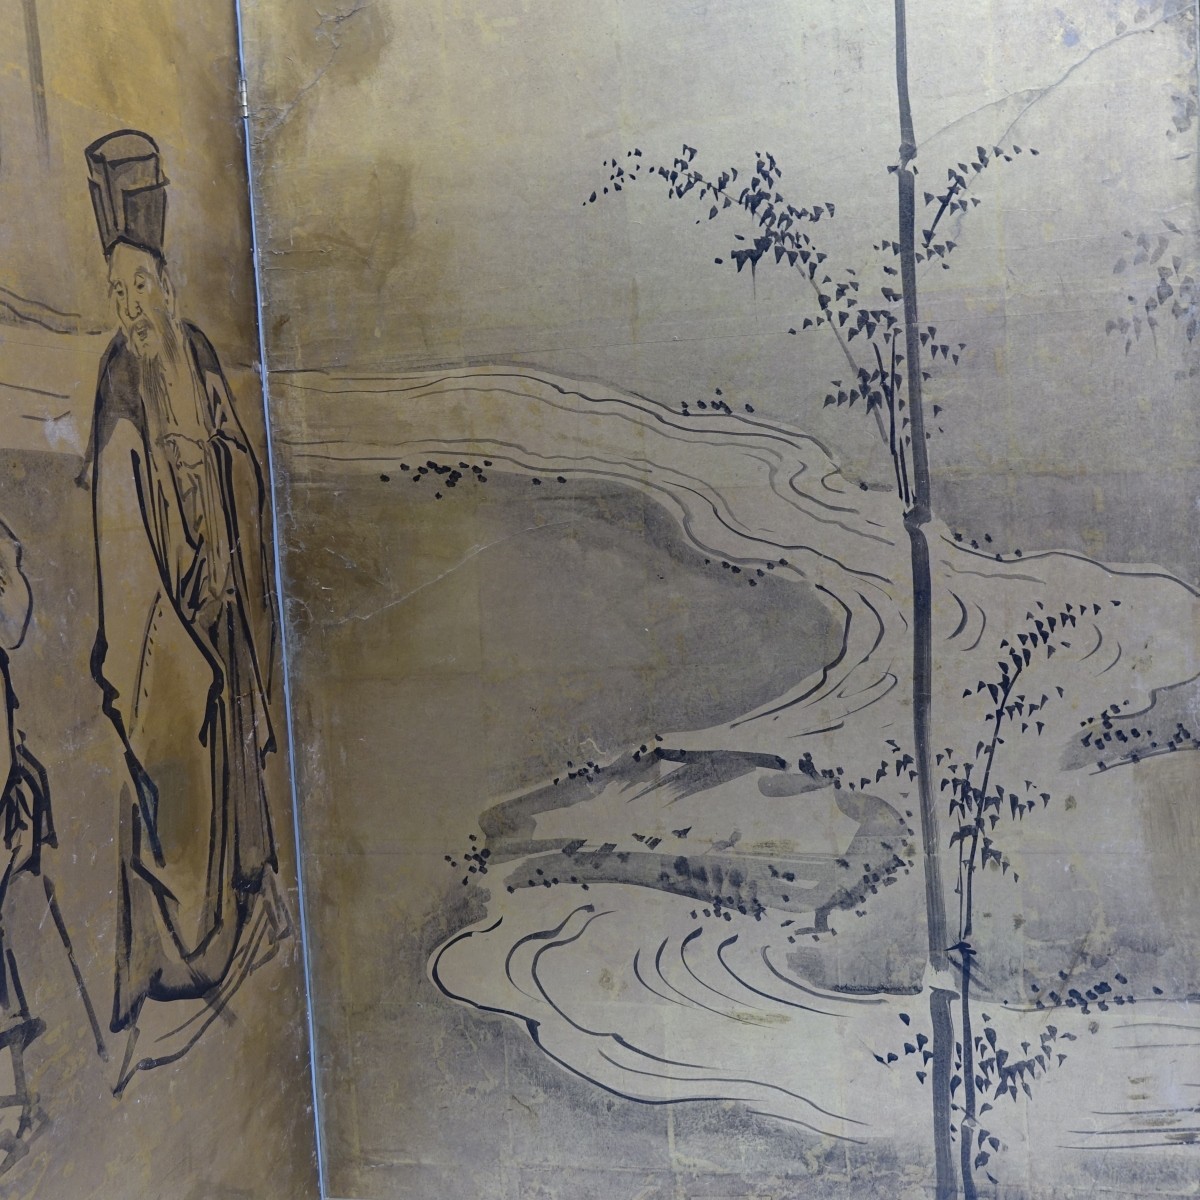 19th C. Chinese Painted Screen